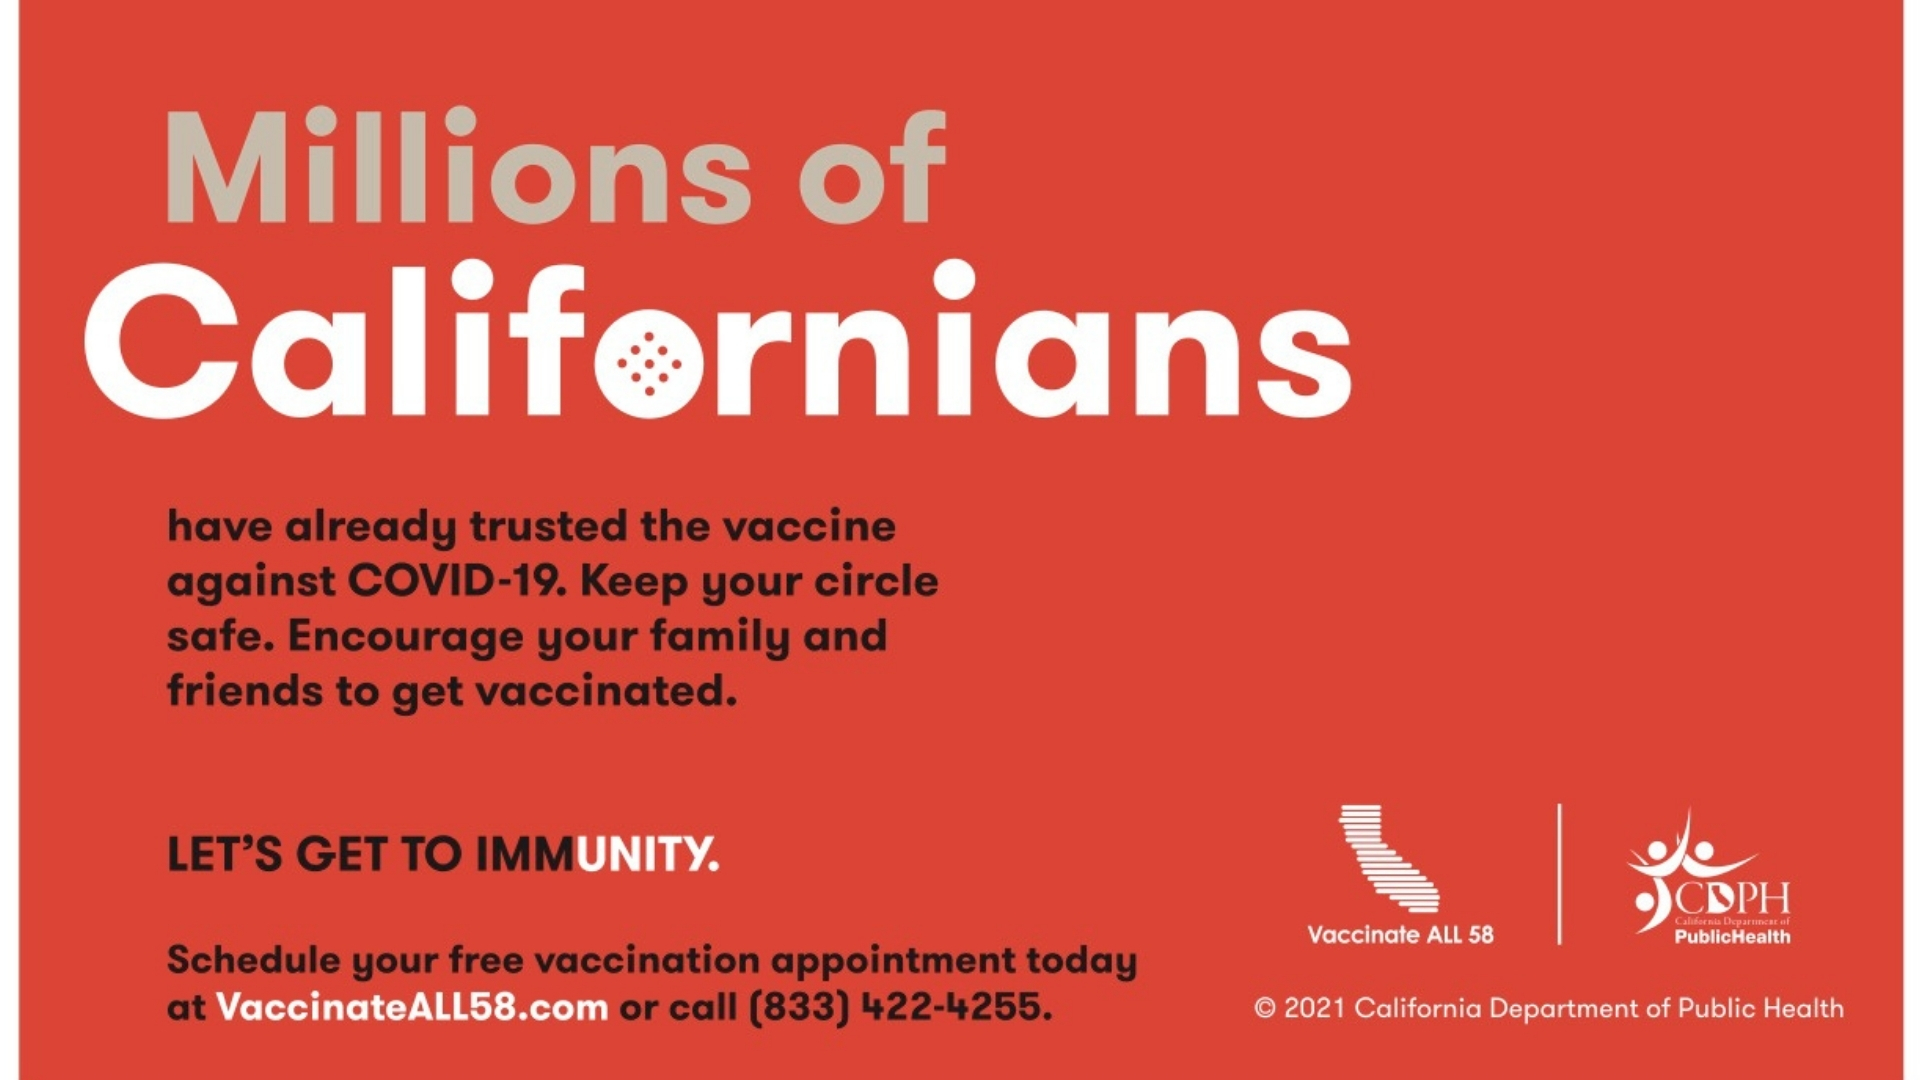 For a free vaccination visit VaccinateALL58.com or call 833-422-4255.